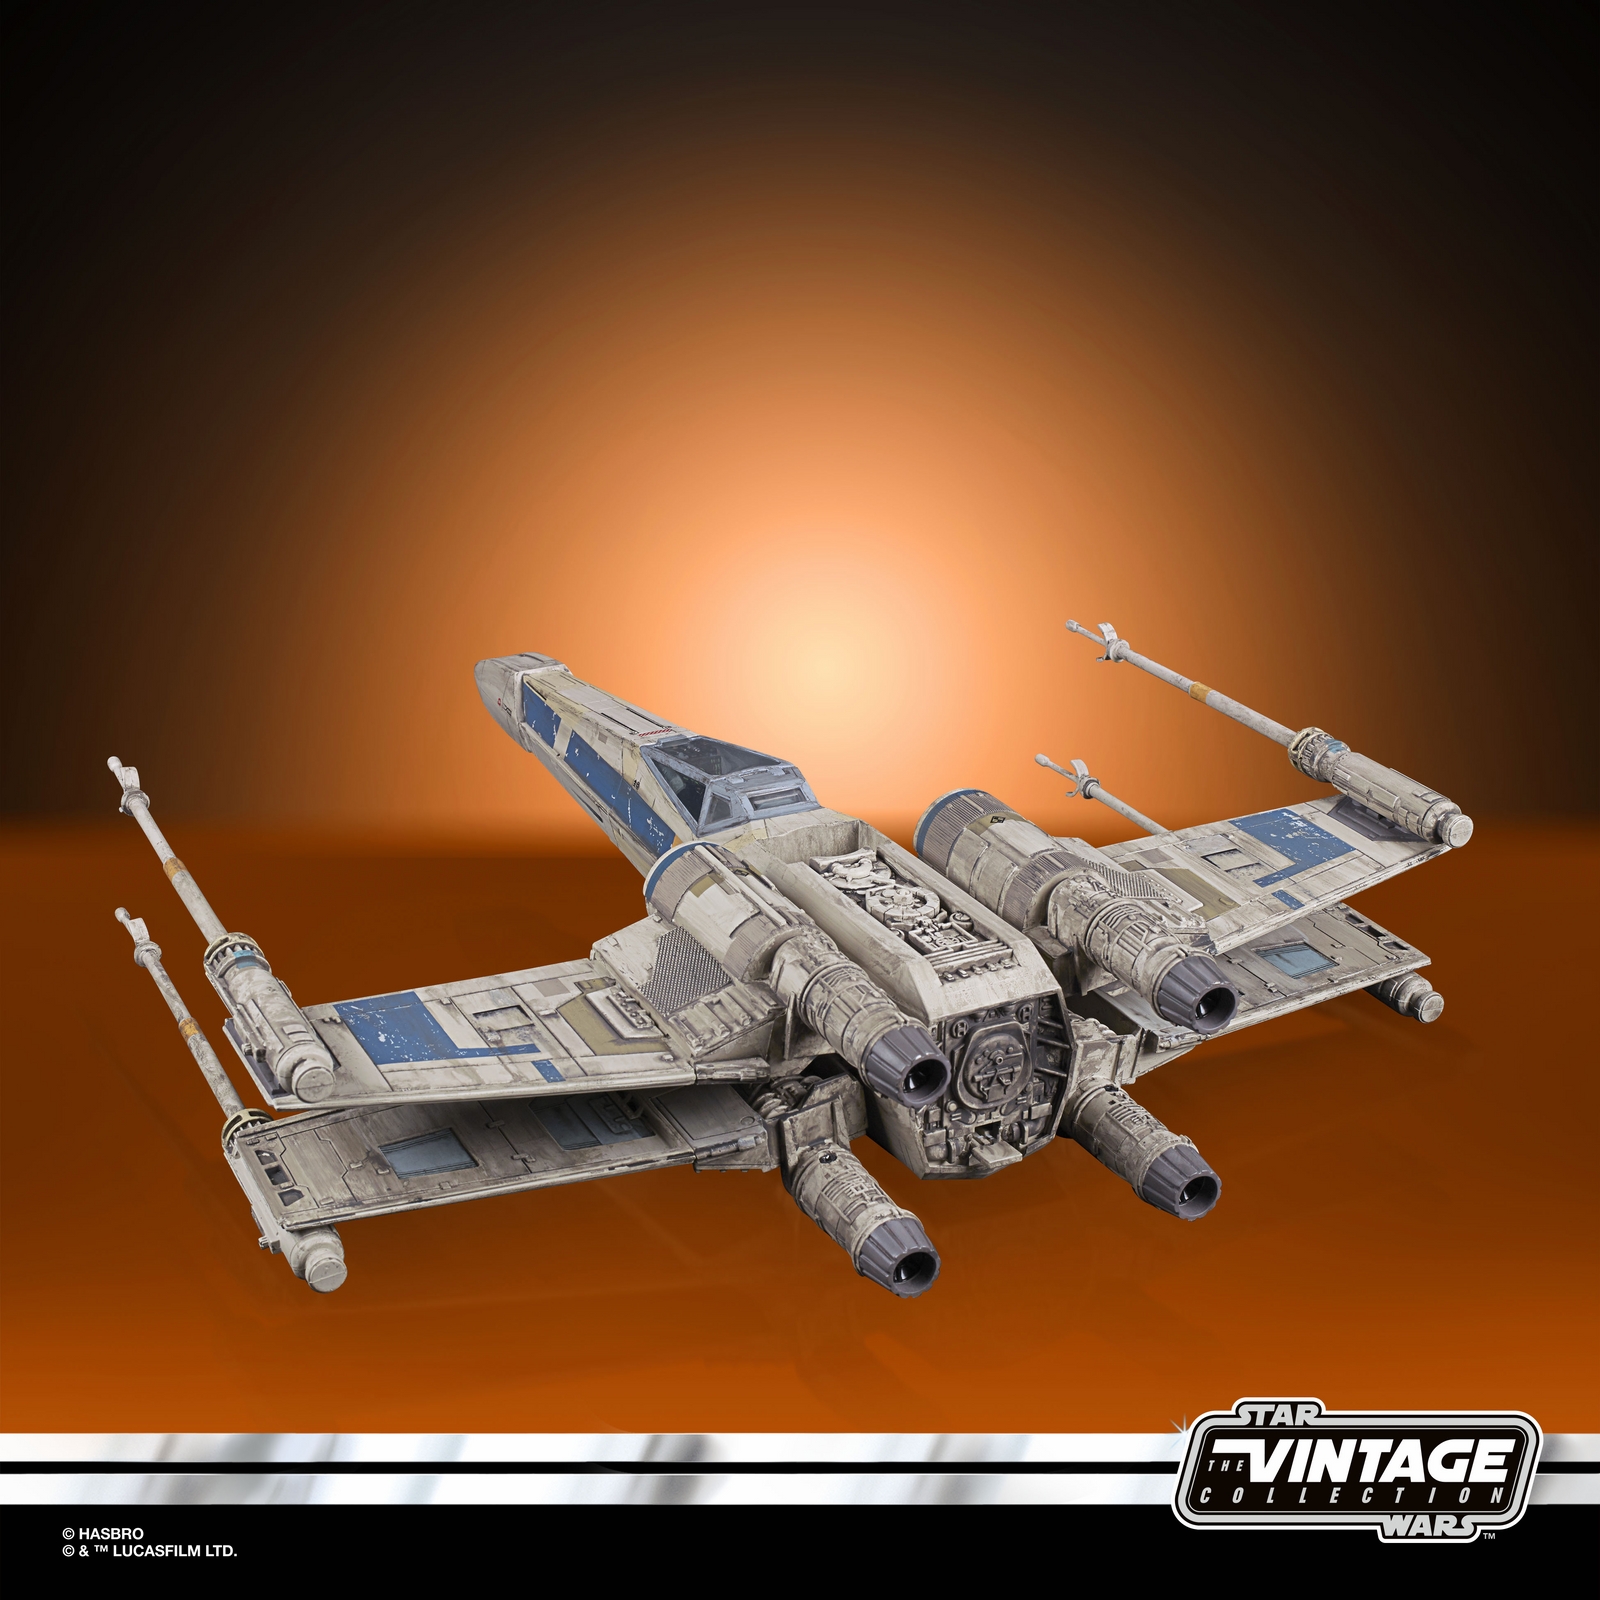 STAR WARS THE VINTAGE COLLECTION ANTOC MERRICK’S X-WING FIGHTER Vehicle and Figure - oop 2.jpg